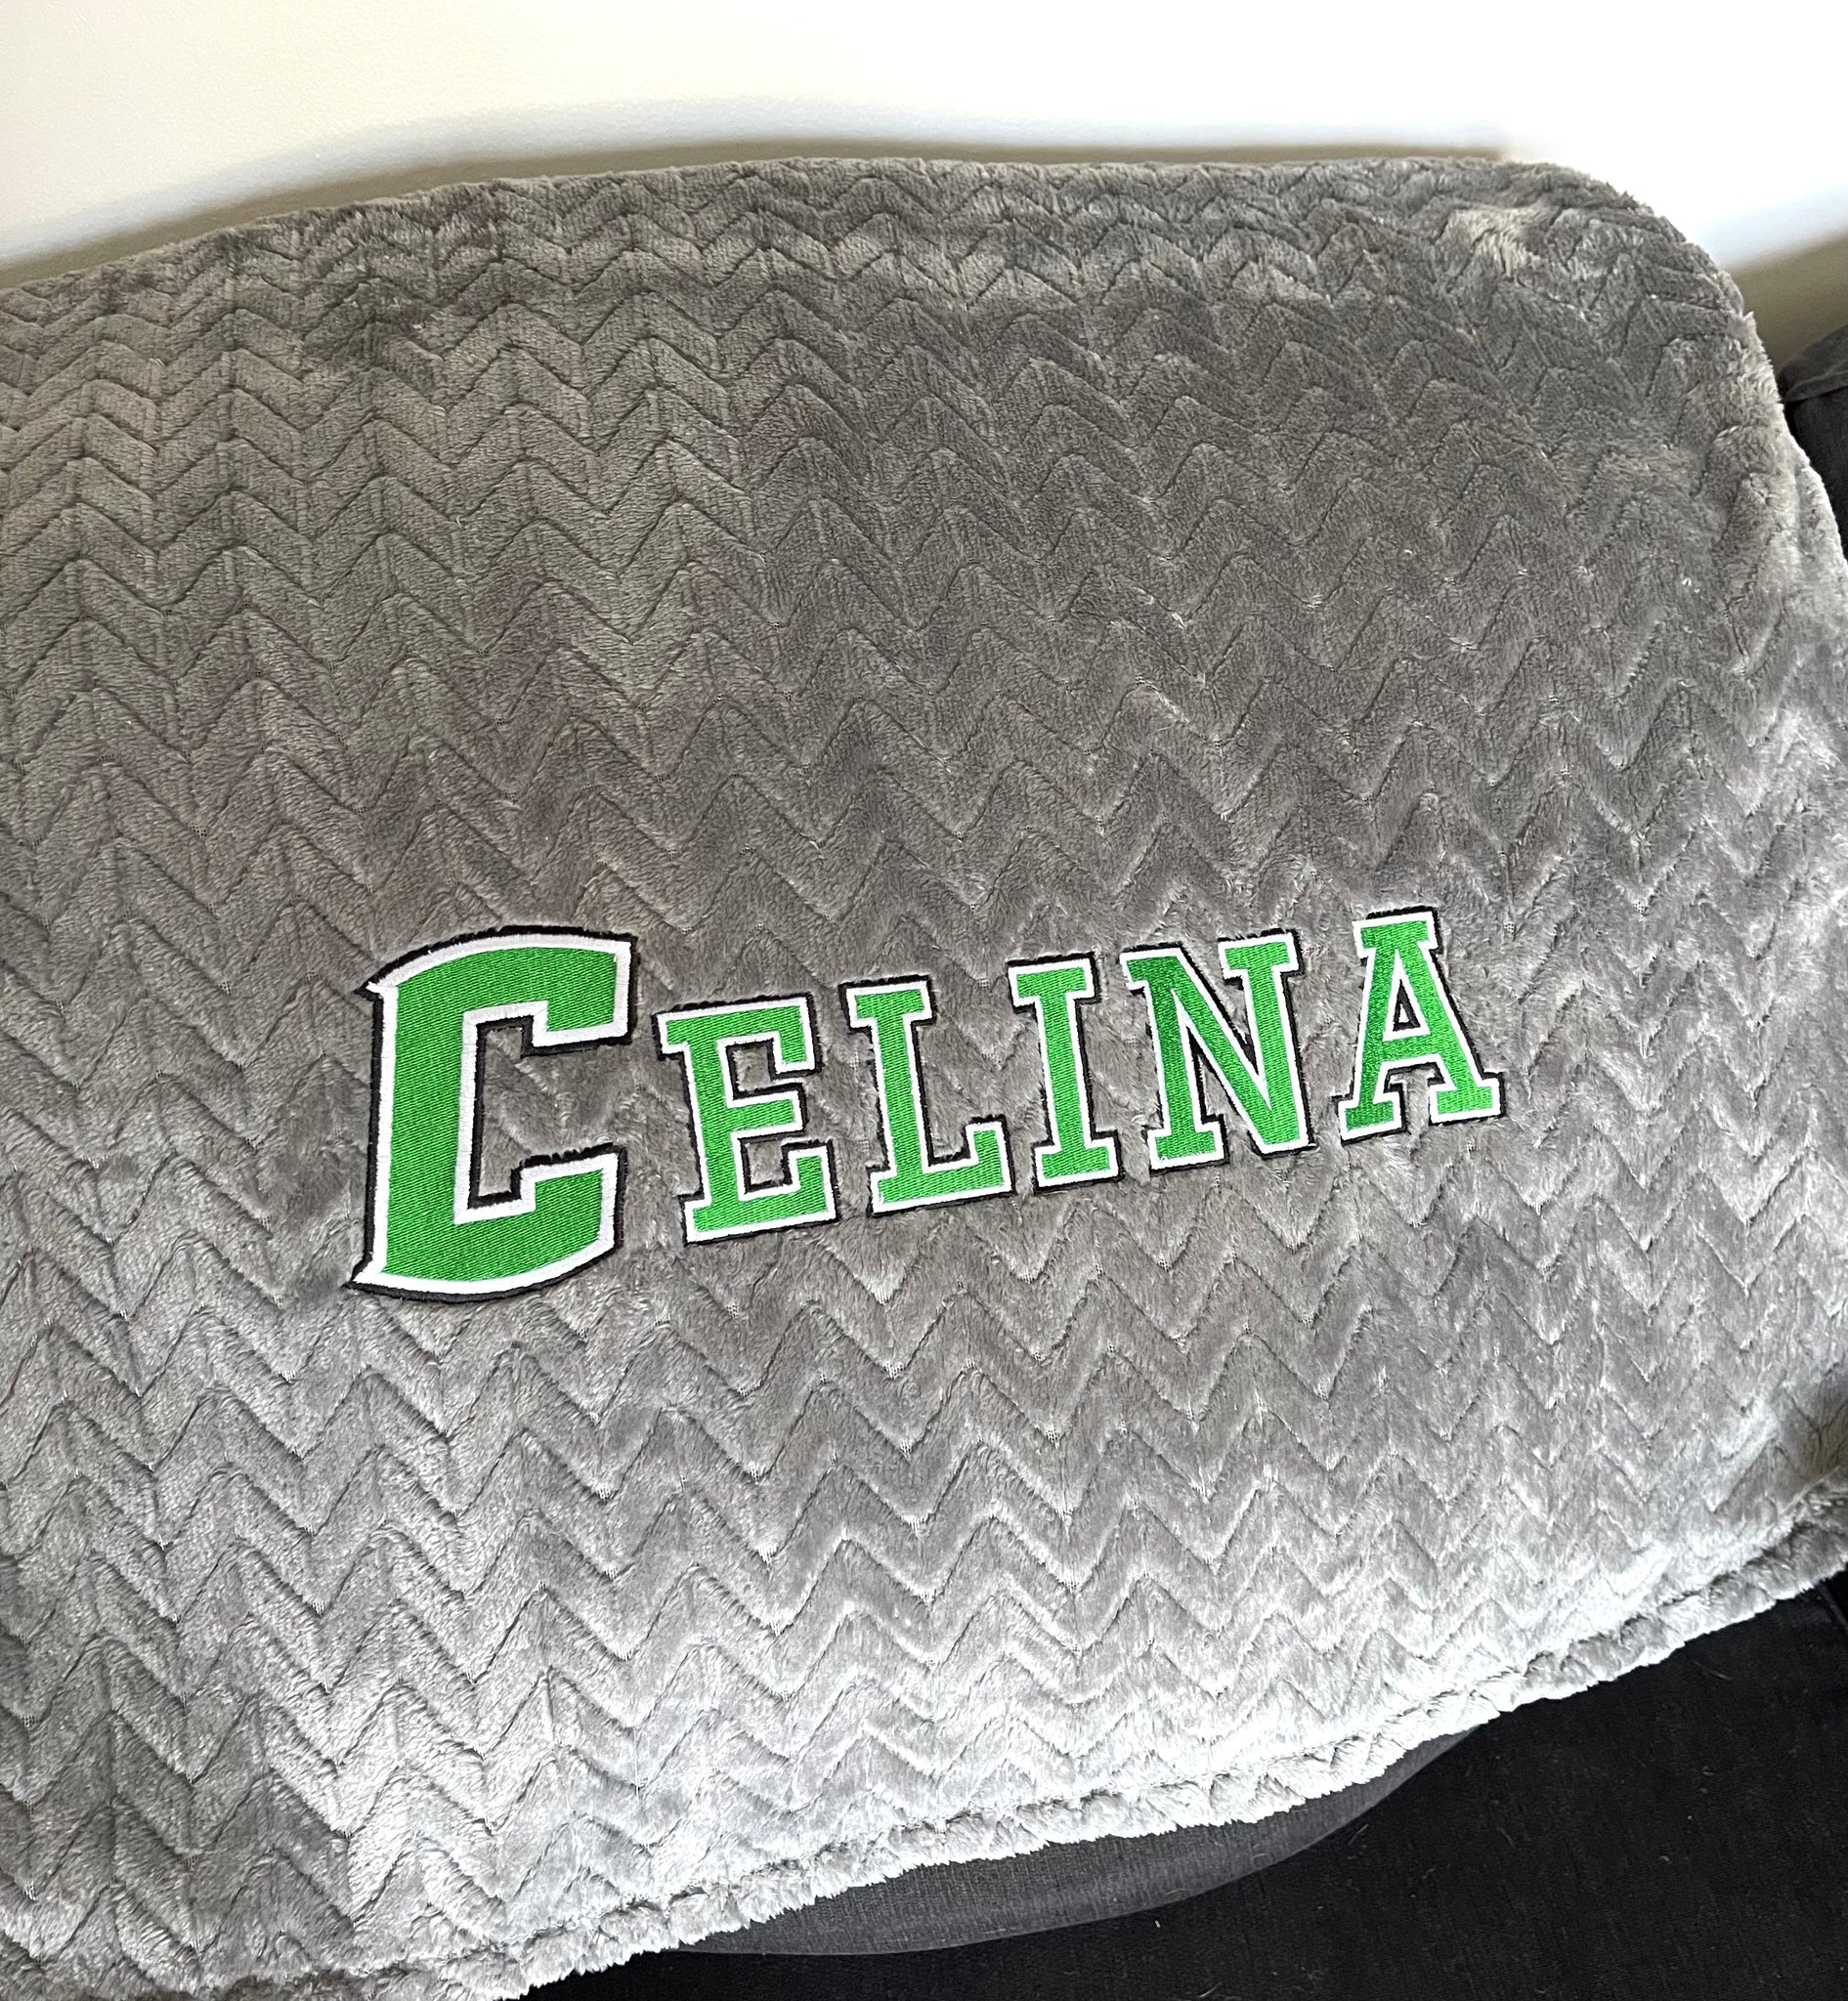 Celina Embroidered Throw Blanket